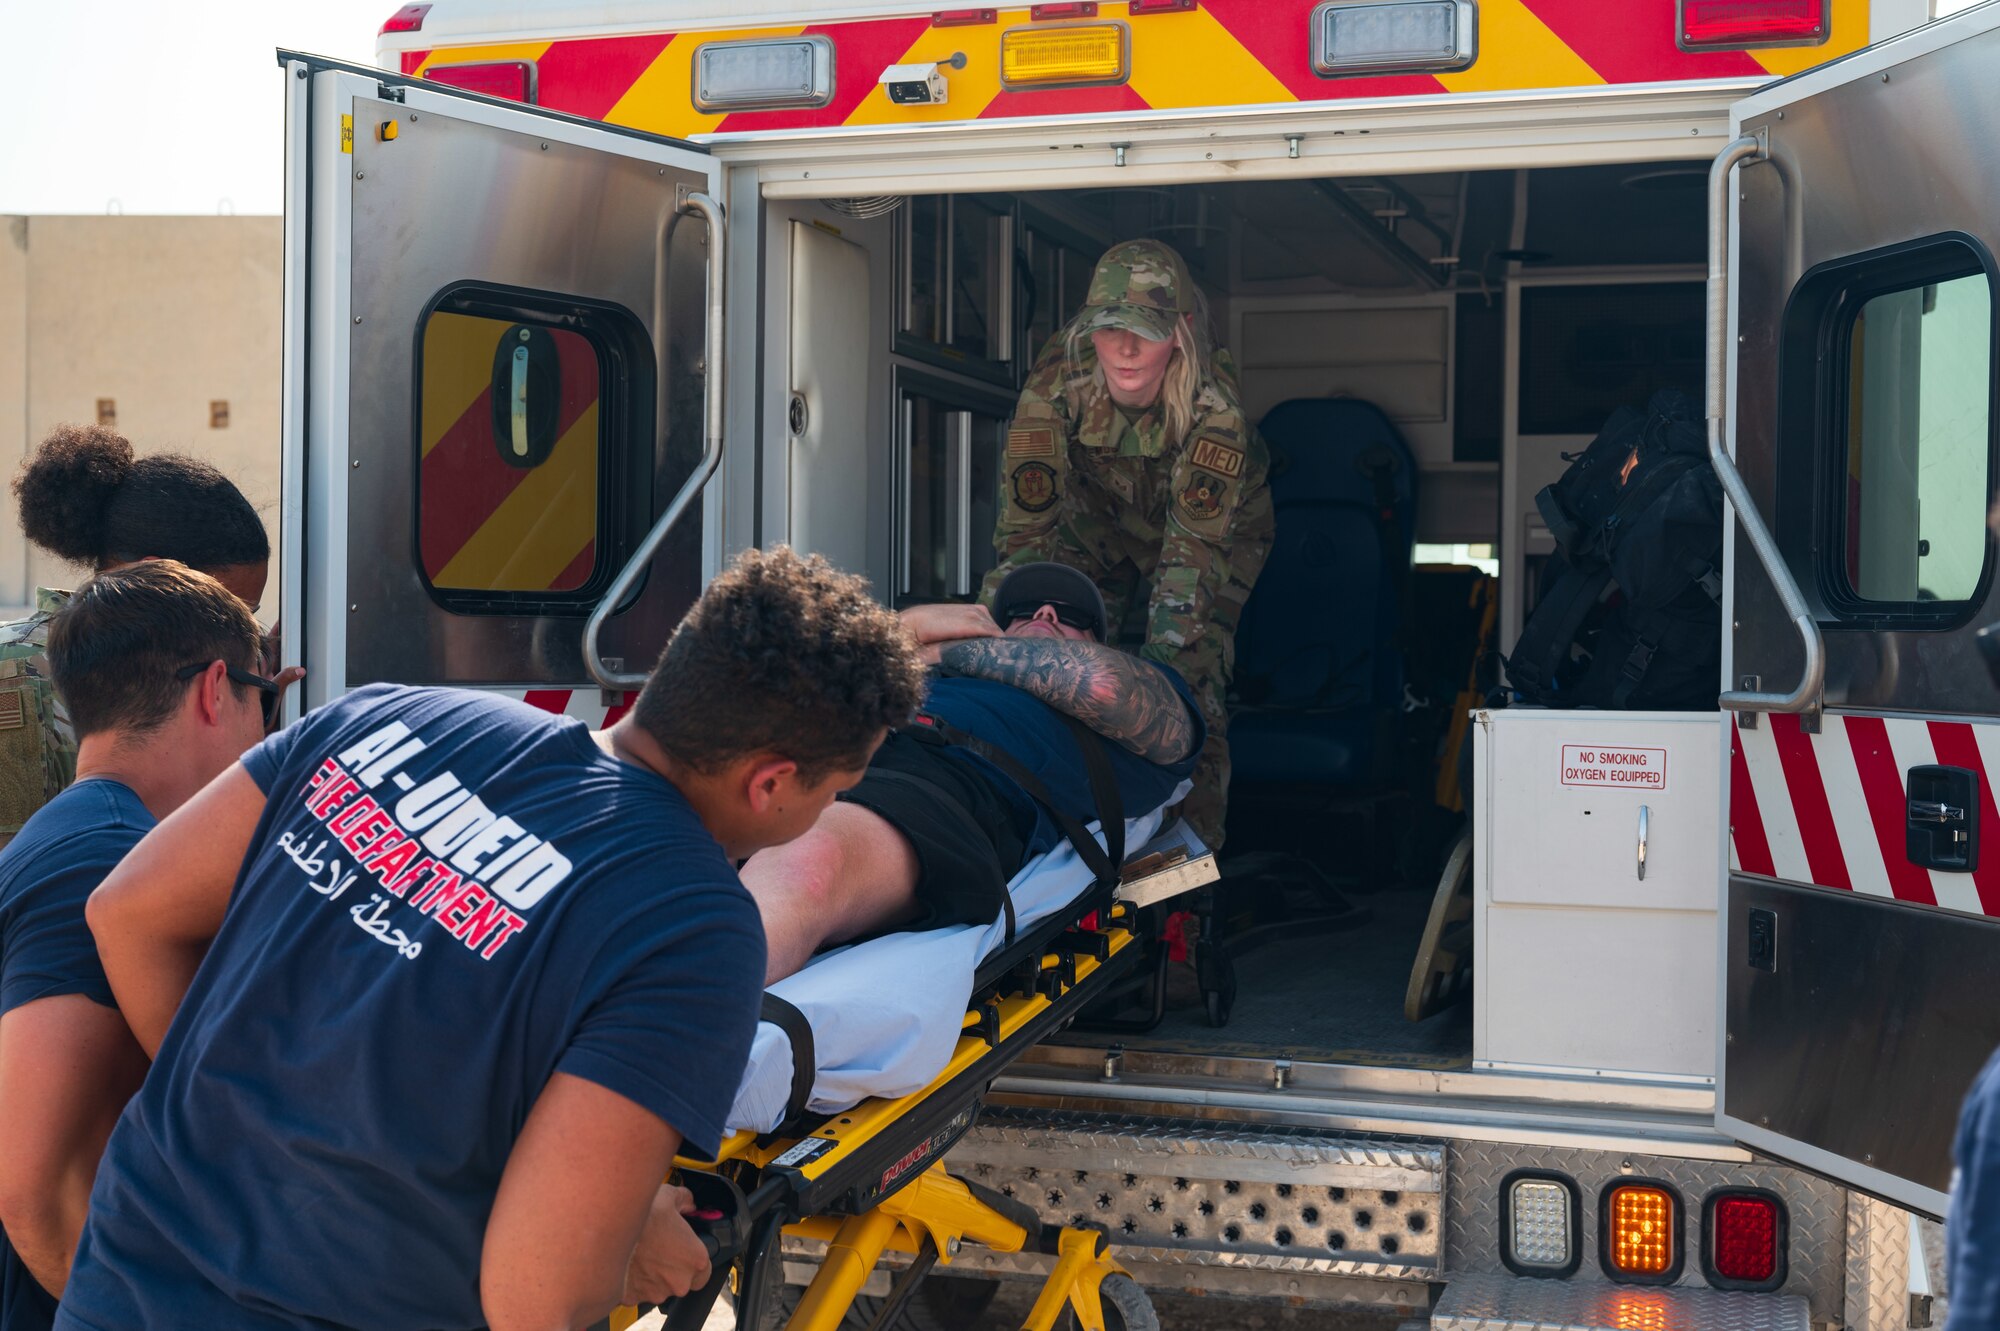 U.S. Air Force firefighters, in unison with USAF paramedics from the 379th Air Expeditionary Wing, simulate recovering wounded firefighter Senior Airman Colton Kelly during an exercise Aug. 24, 2022 at Al Udeid Air Base, Qatar. Colton had simulated wounds from stepping on explosive ordnance during an exercise. (U.S. Air Force photo by Staff Sgt. Dana Tourtellotte)